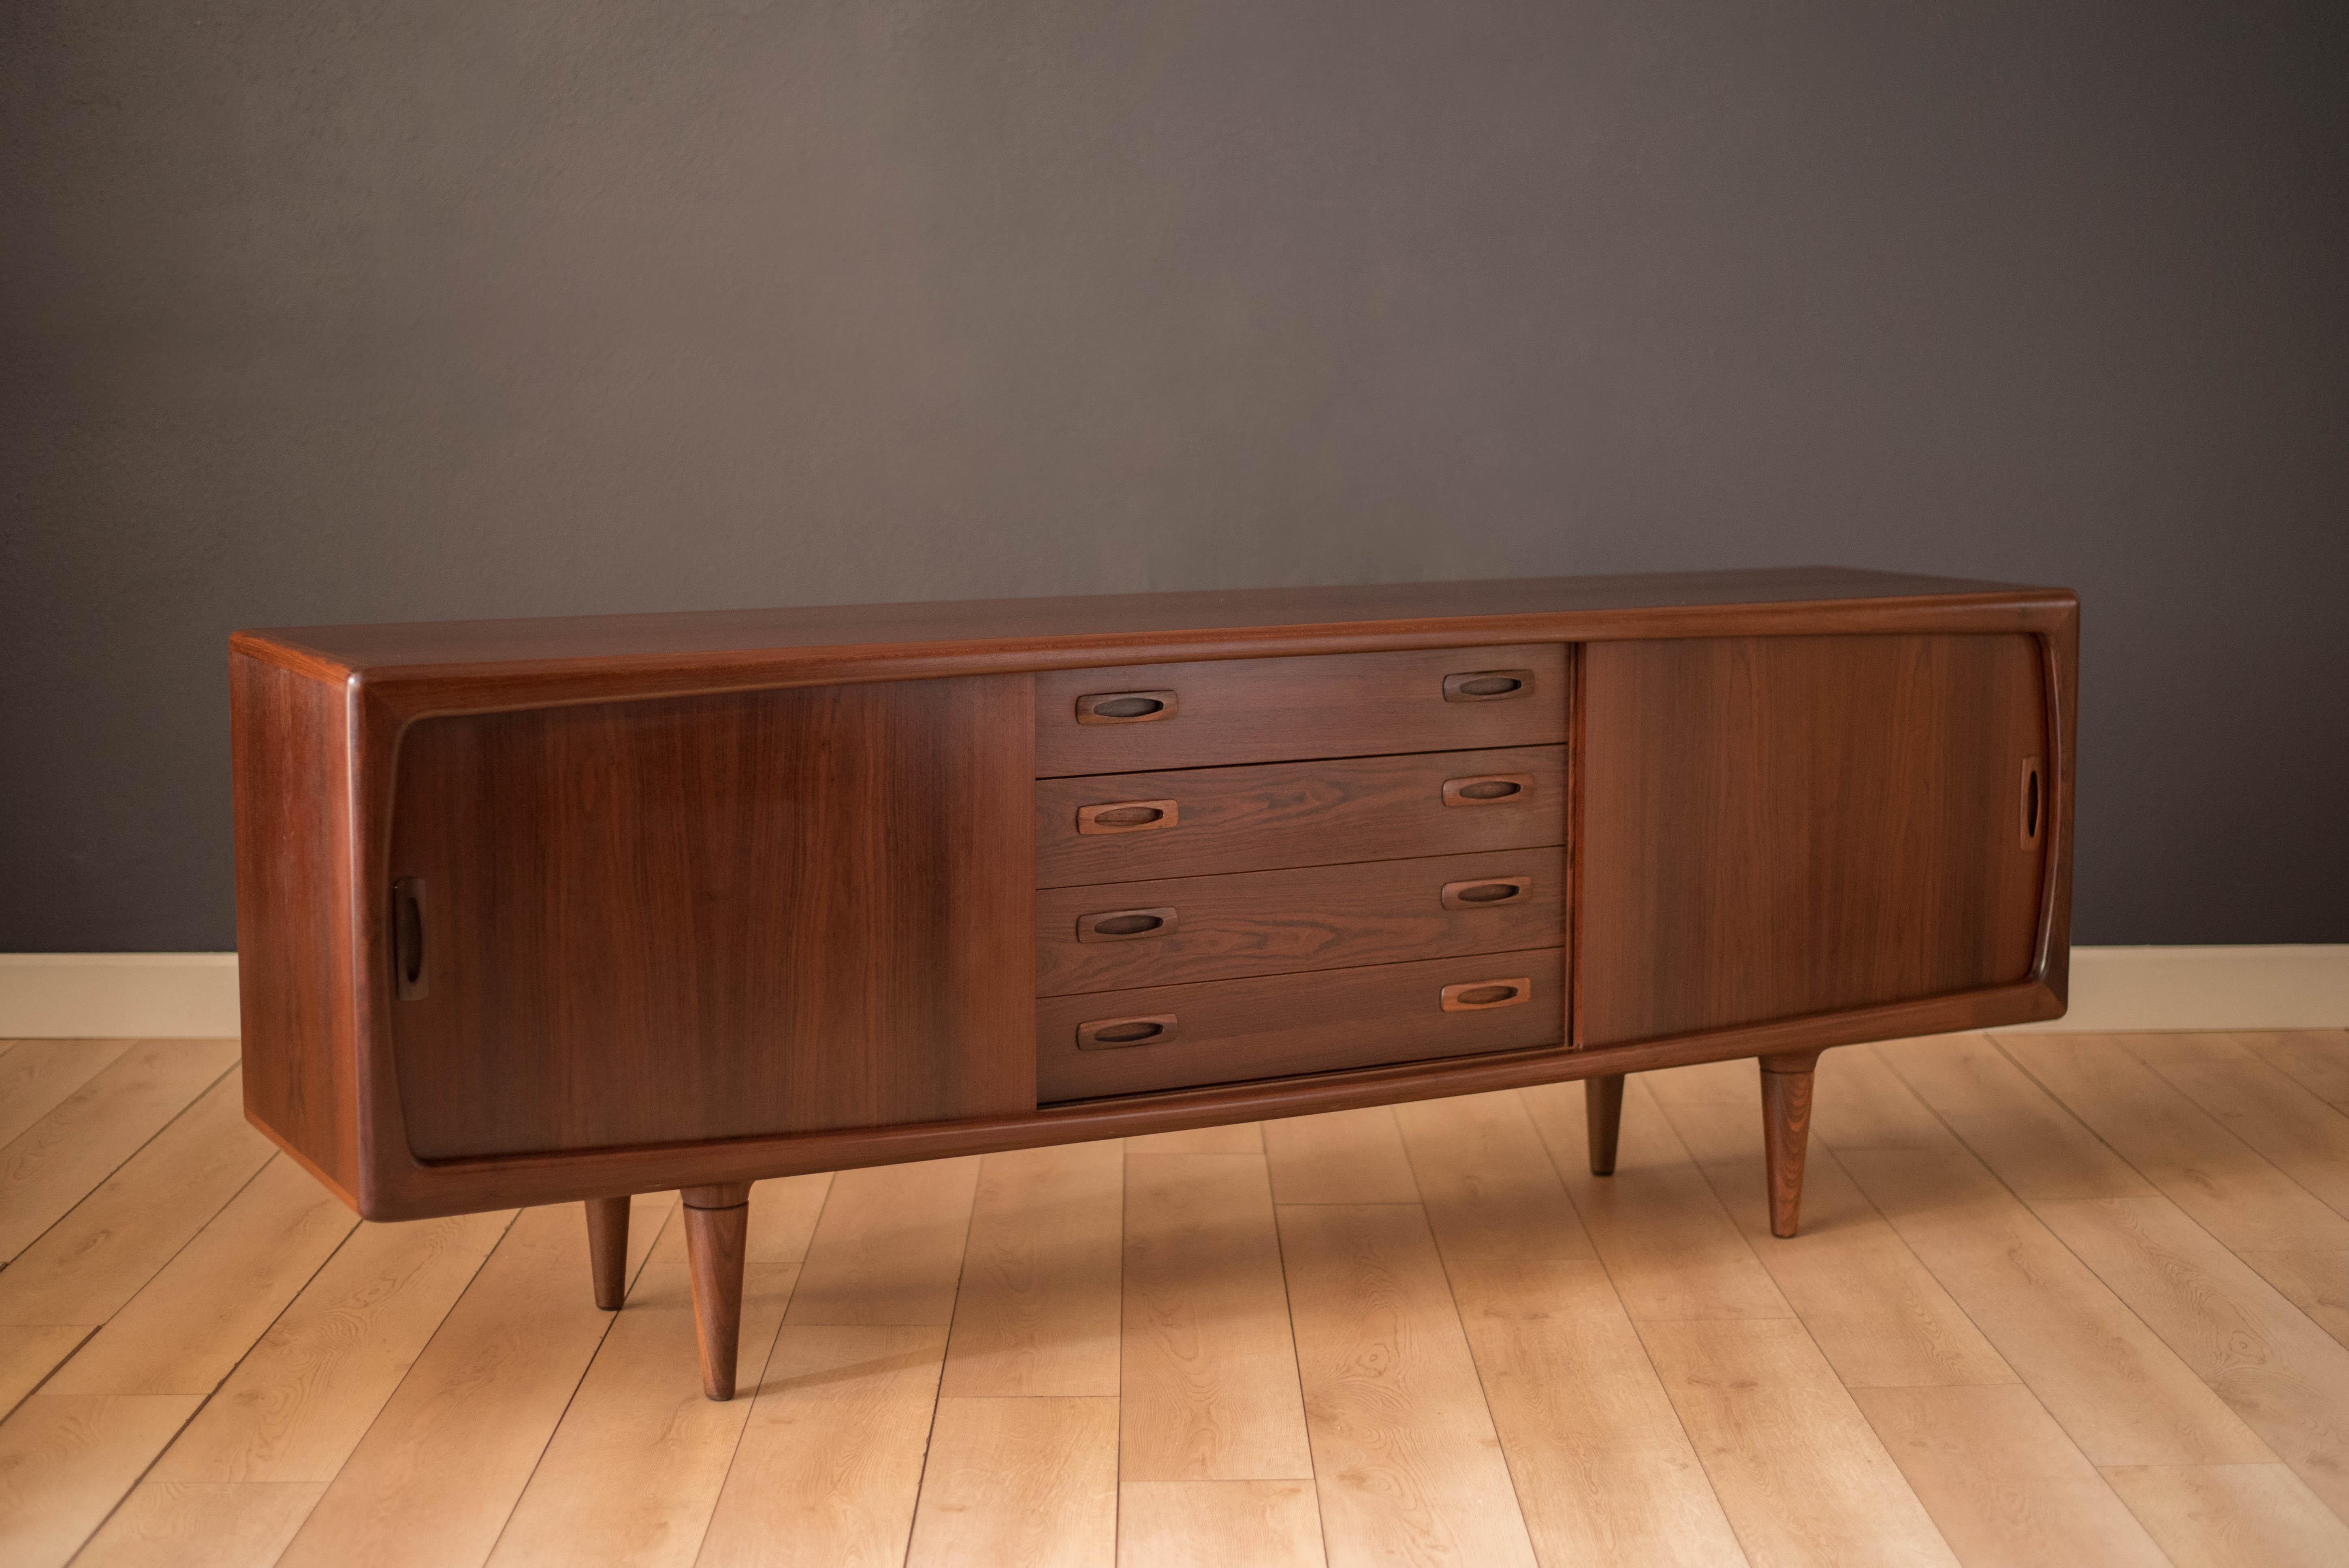 Mid-Century Modern credenza by H.P. Hansen in rosewood, circa 1960s. This showcase piece features four storage dovetailed drawers with sculpted handles and two open cabinets with adjustable shelving concealed by sliding doors.

 